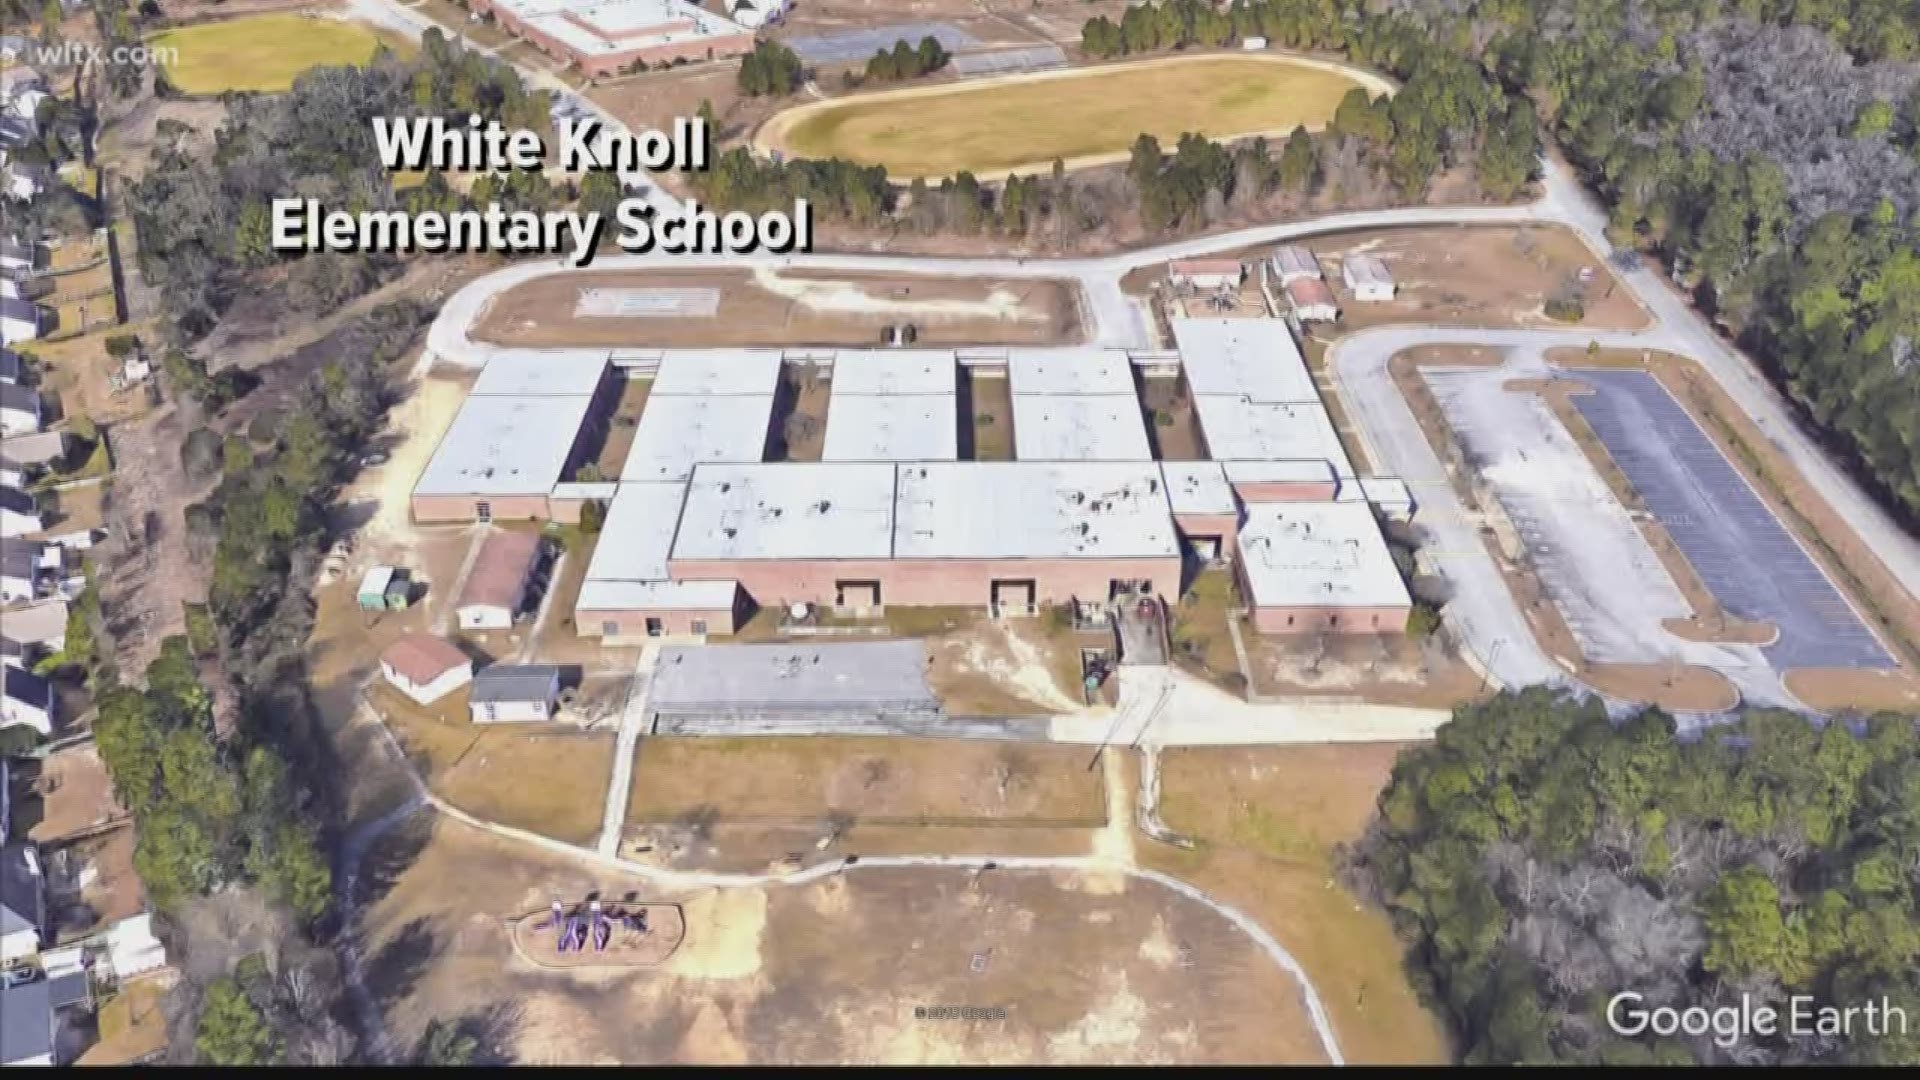 Lexington School District One purchased the land for the new White Knoll Elementary school-a 35-acre piece of land for $350K.